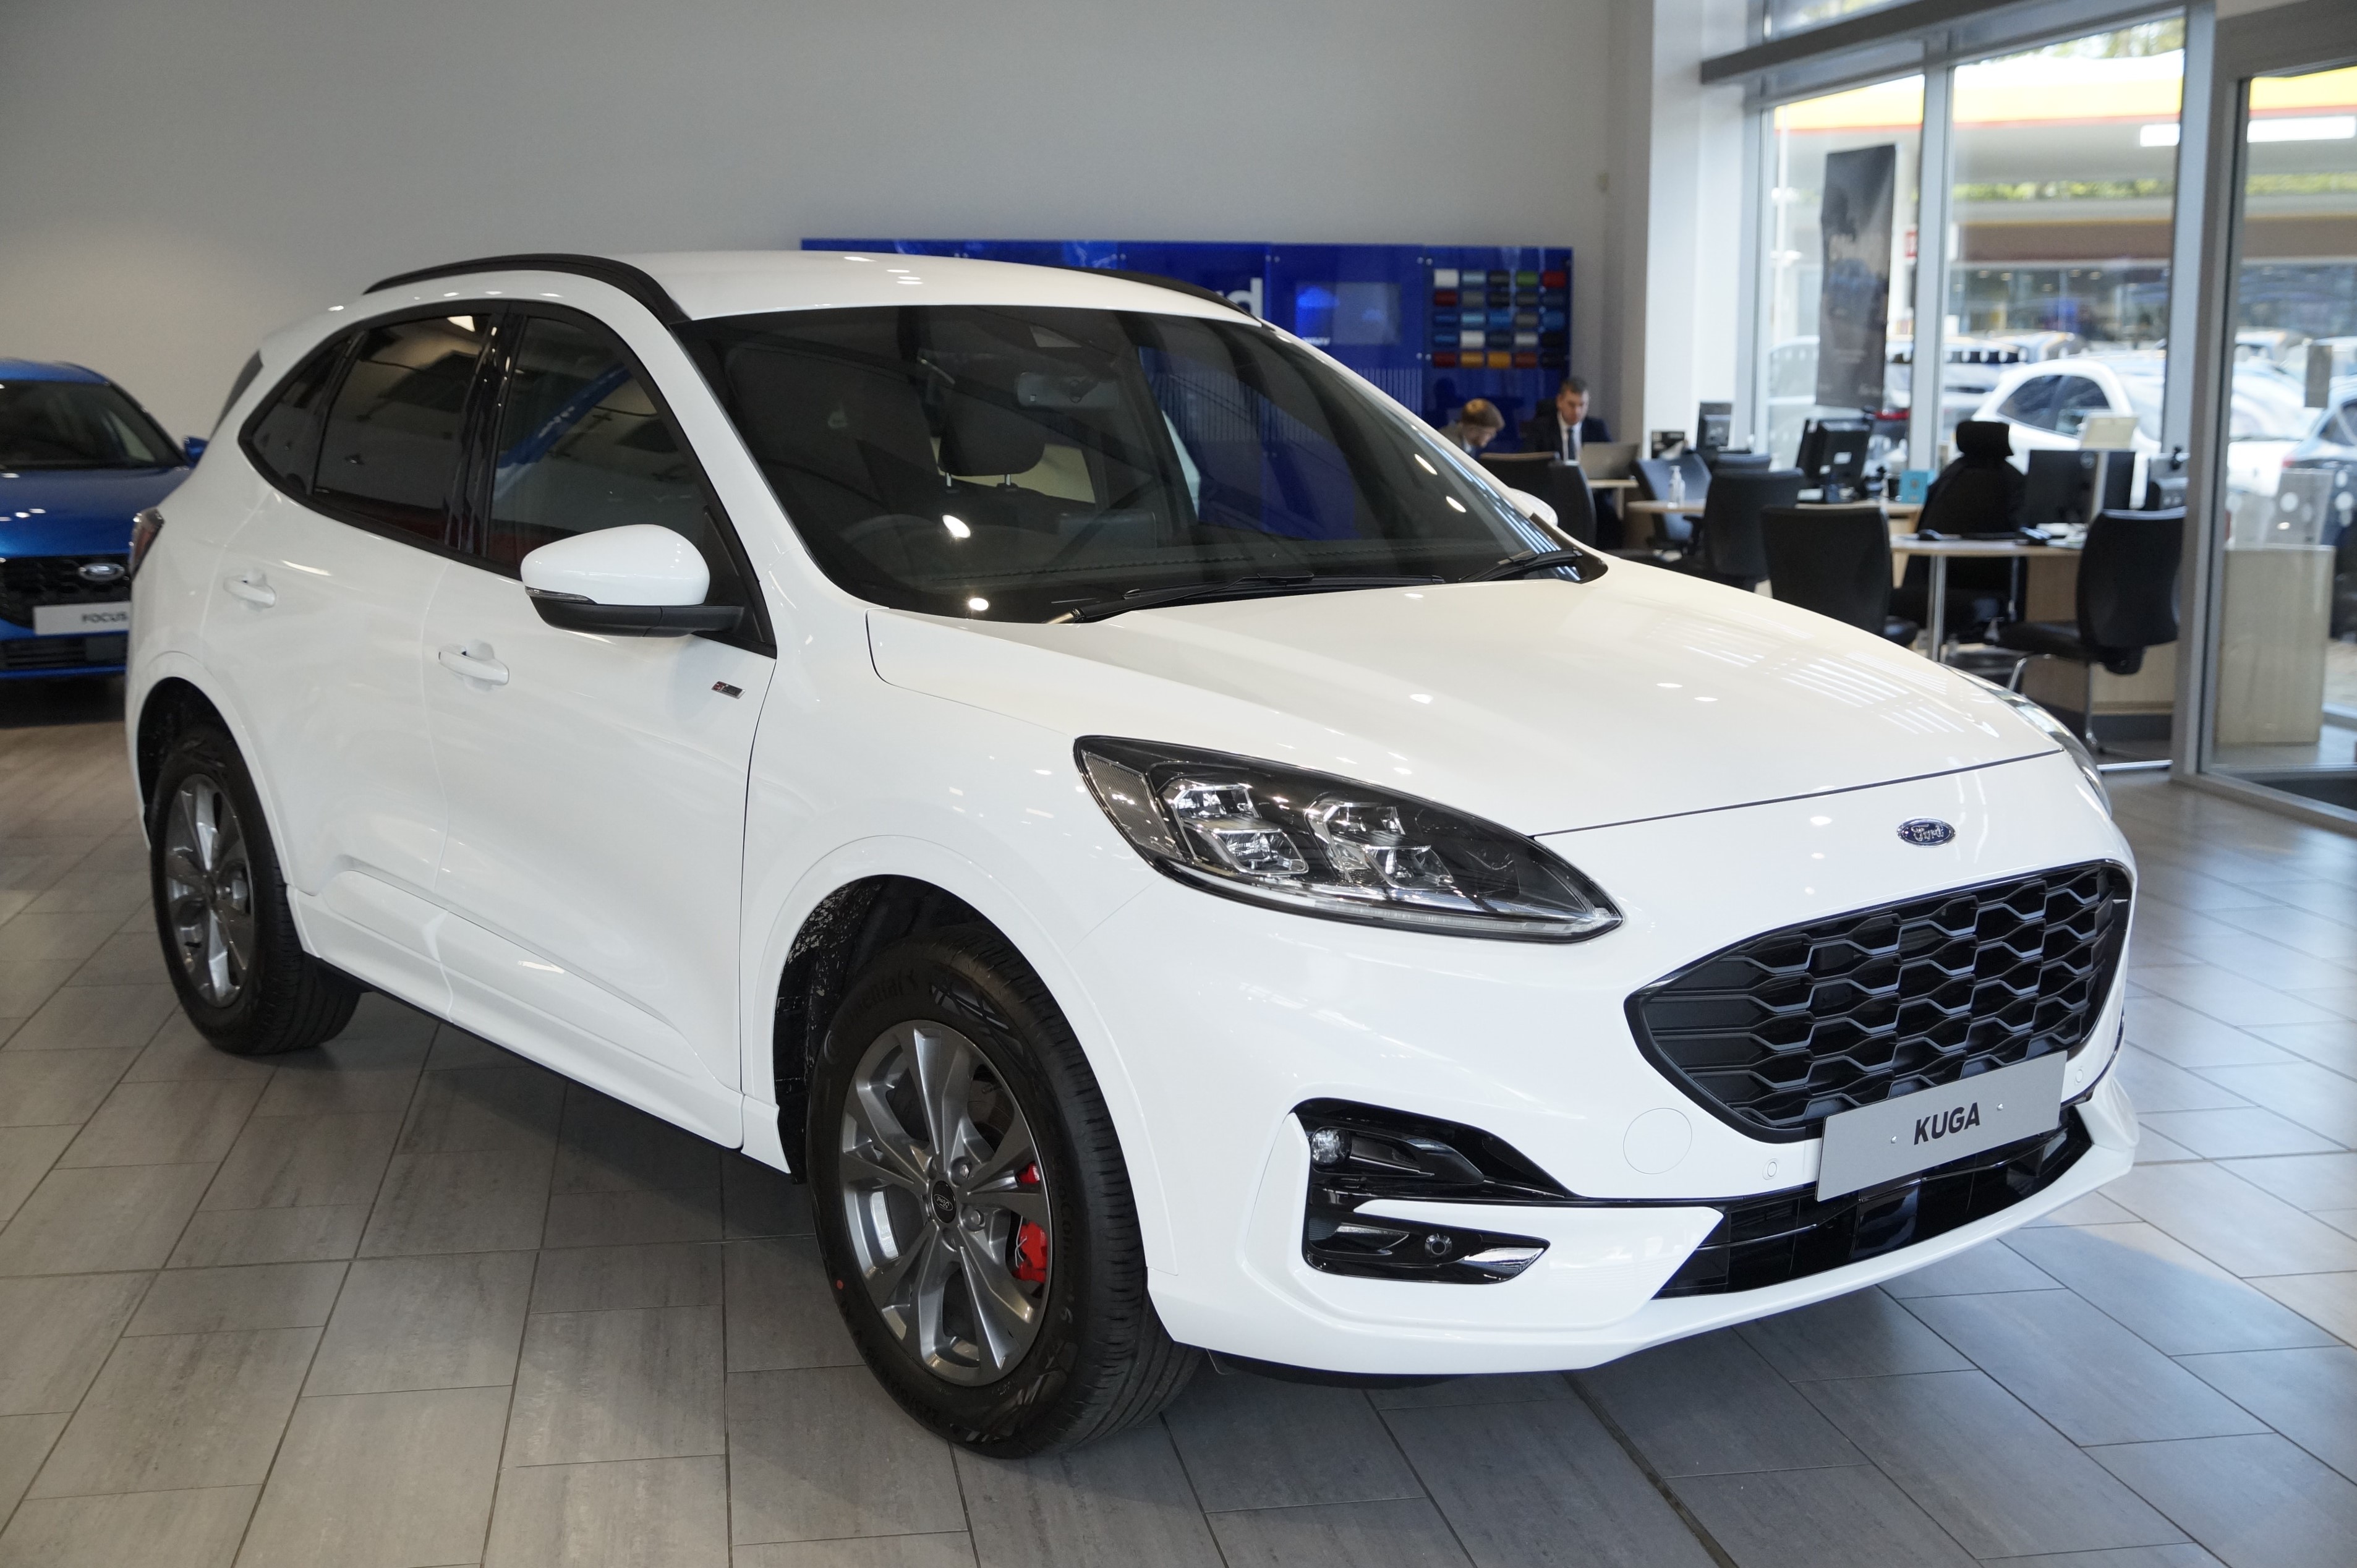 KUGA ST-LINE EDITION 5 DOOR 2.5L DURATEC PHEV 225PS FWD CVT AUTOMATIC